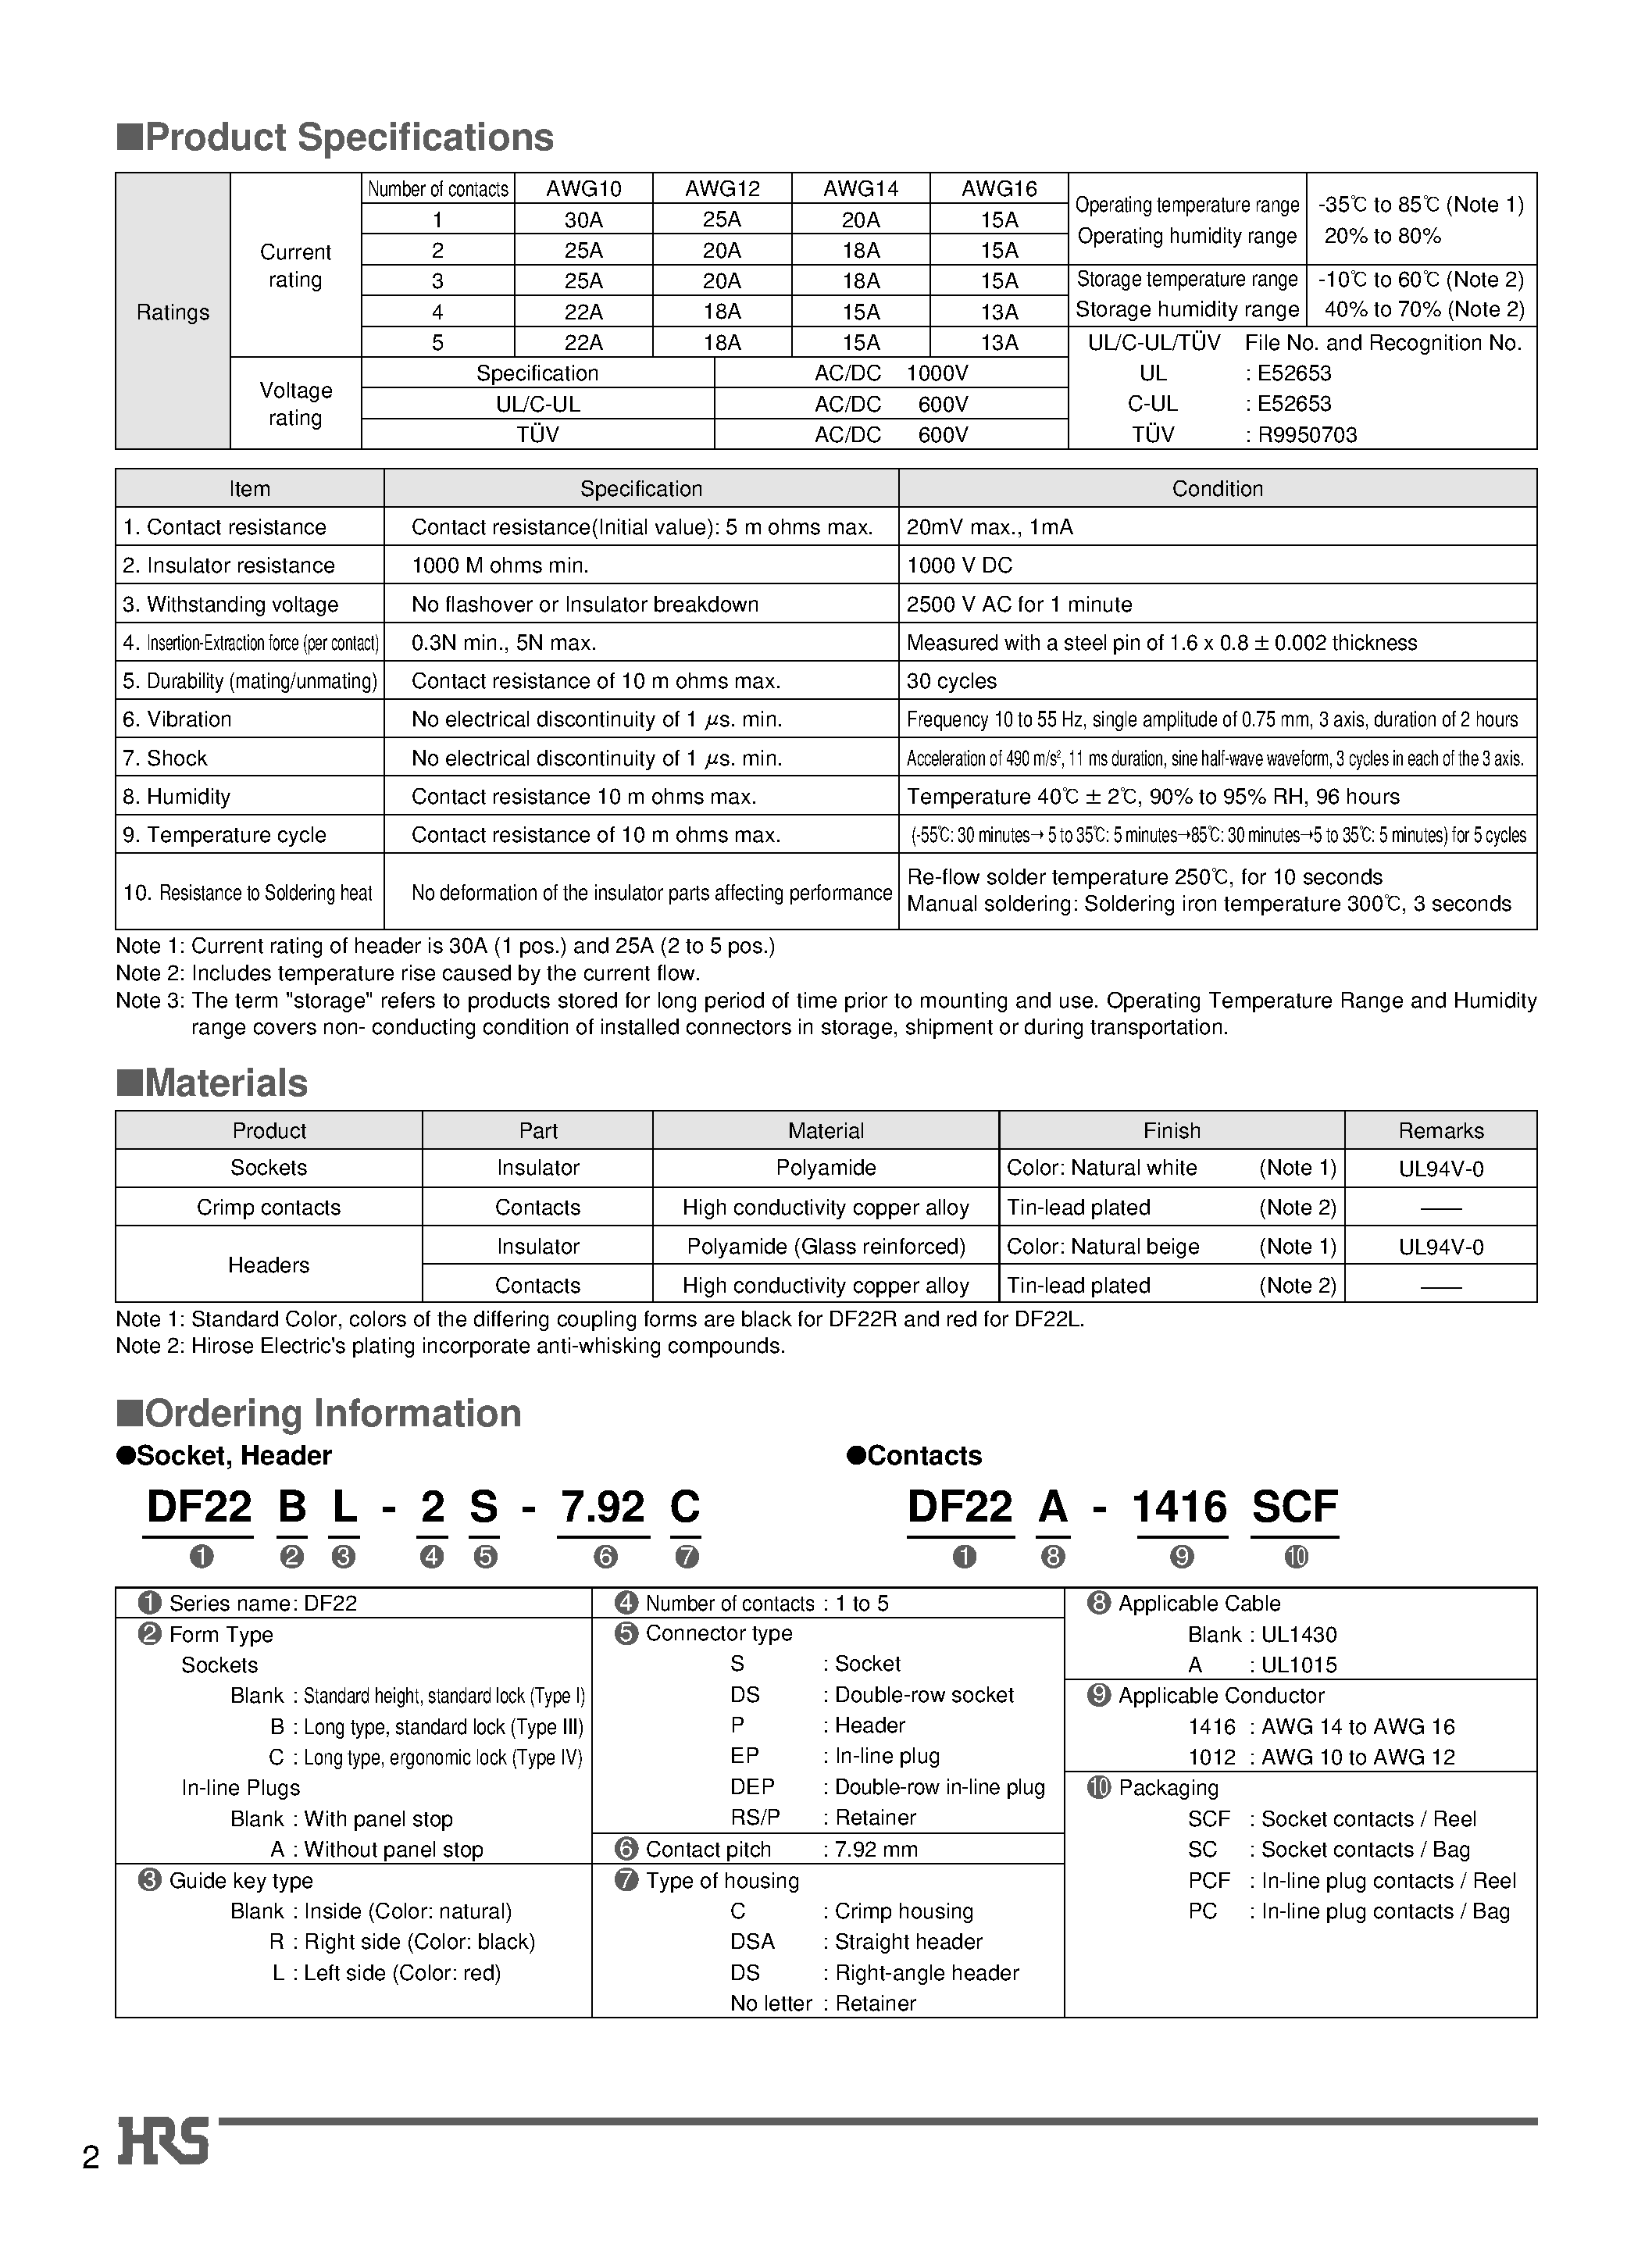 Datasheet DF22A-2RS/P-7.92 - 7.92 mm Contact Pitch/ High-Current Connectors for Internal Power Supplies (UL/ C-UL and TUV Listed) page 2